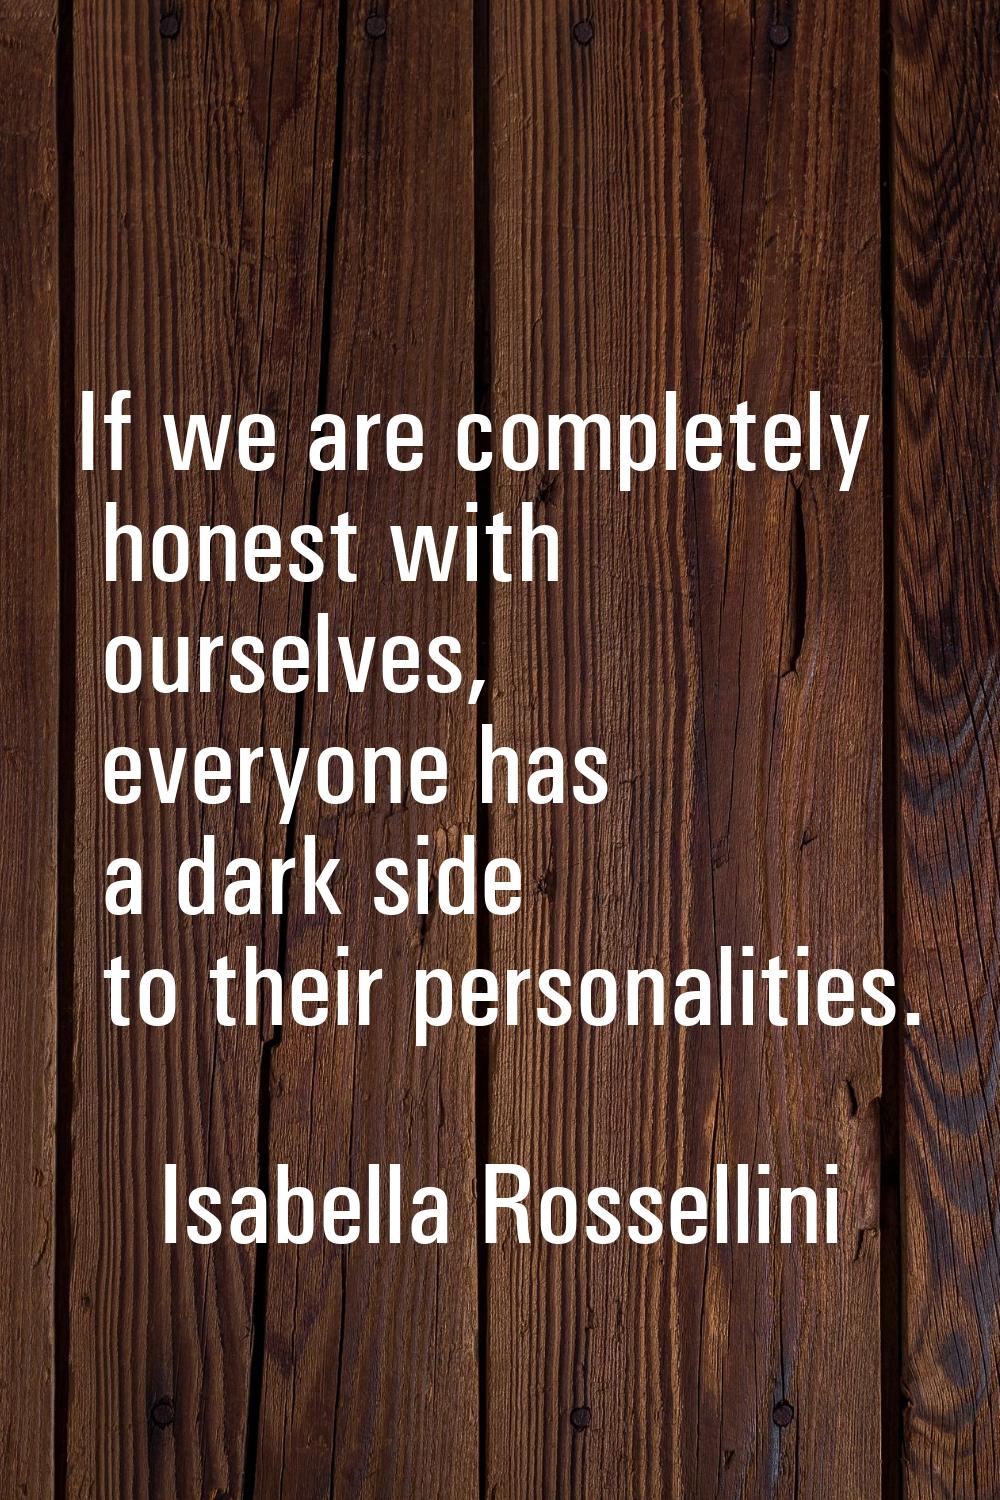 If we are completely honest with ourselves, everyone has a dark side to their personalities.